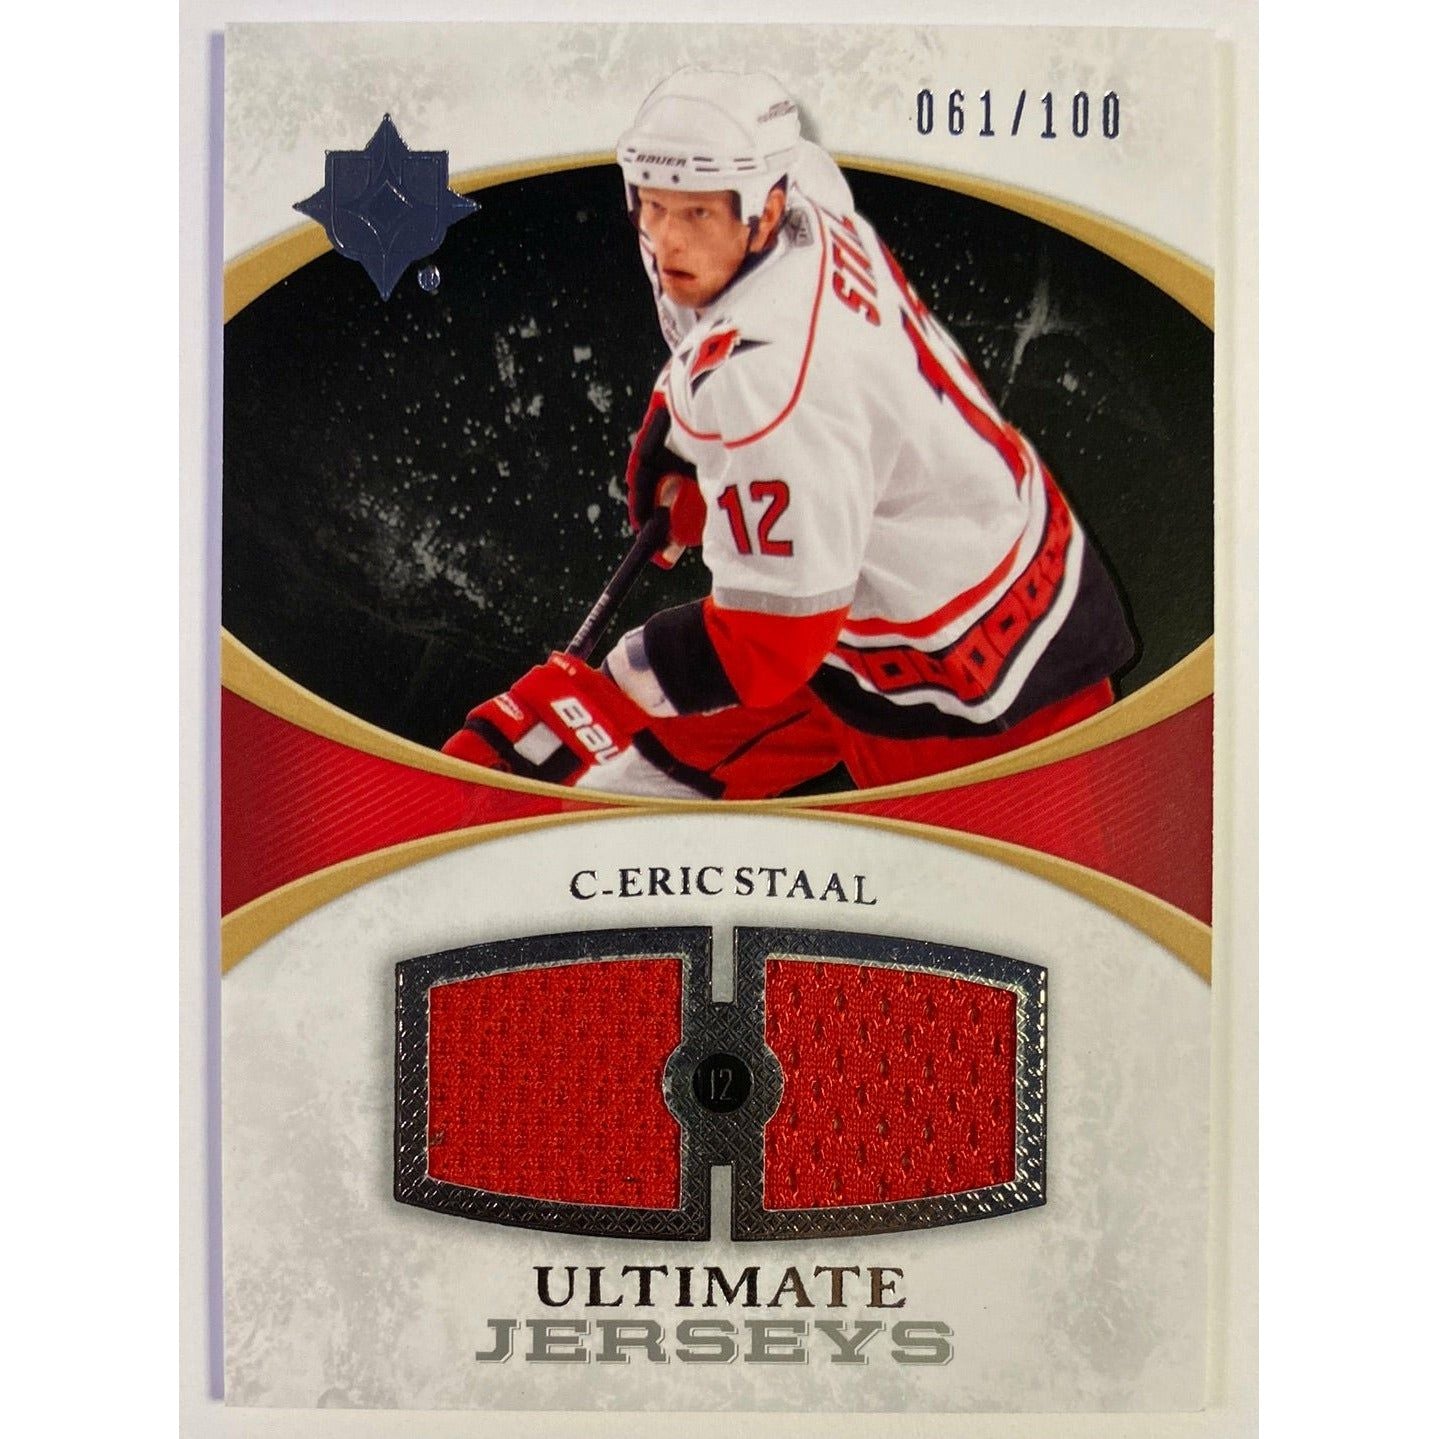  2010-11 Ultímate Collection Eric Stall Ultimate Jerseys /100  Local Legends Cards & Collectibles